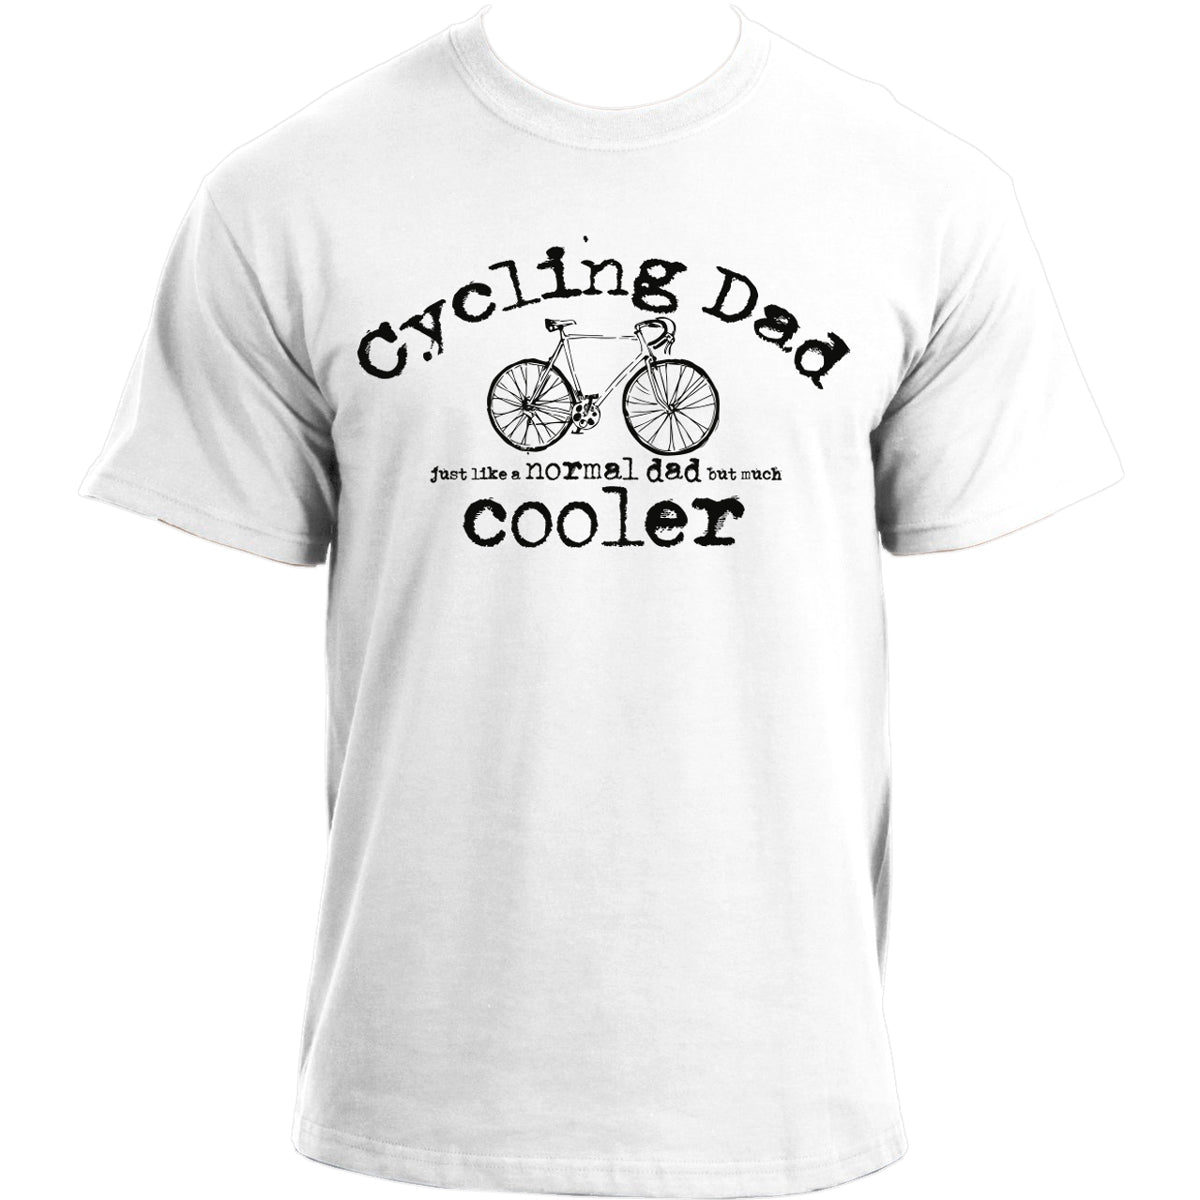 Cycling Dad Just Like A Normal Dad But Much Cooler T-Shirt I Novelty Cyclist Tee Bike Sports Top Tshirt For Men